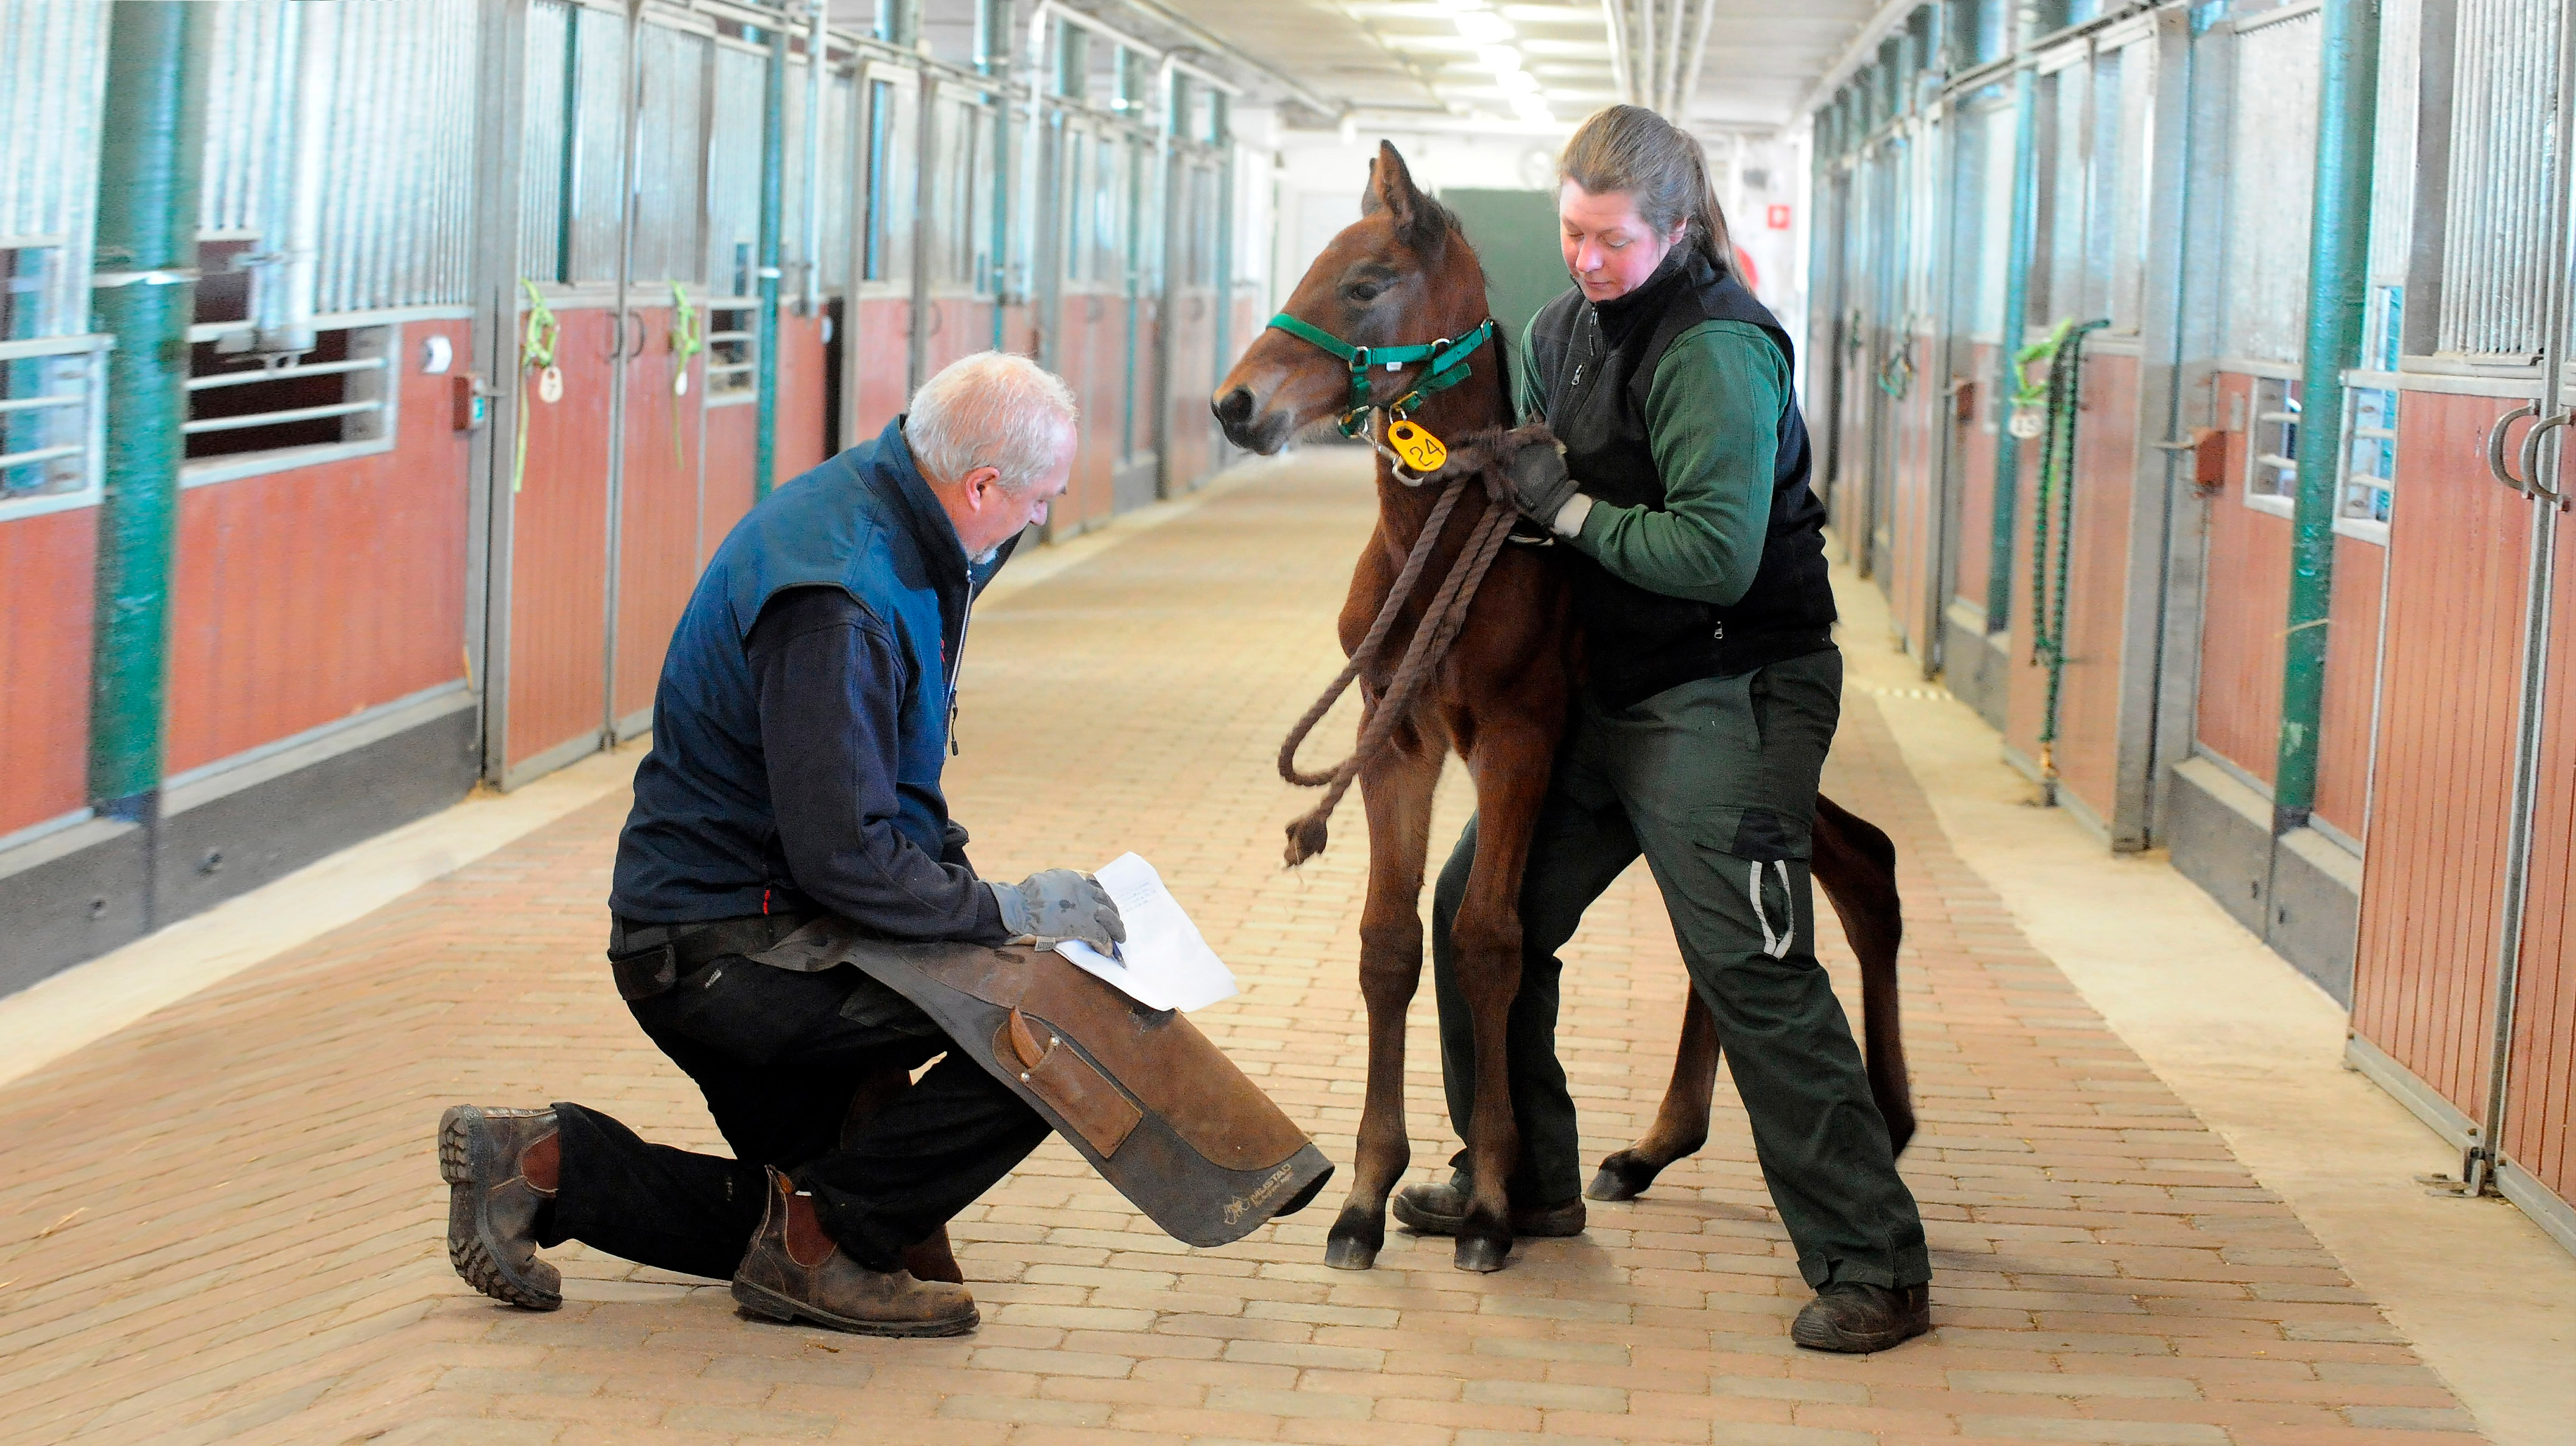 The Swedish farrier Jörgen Nordqvist examining a foal in a stable